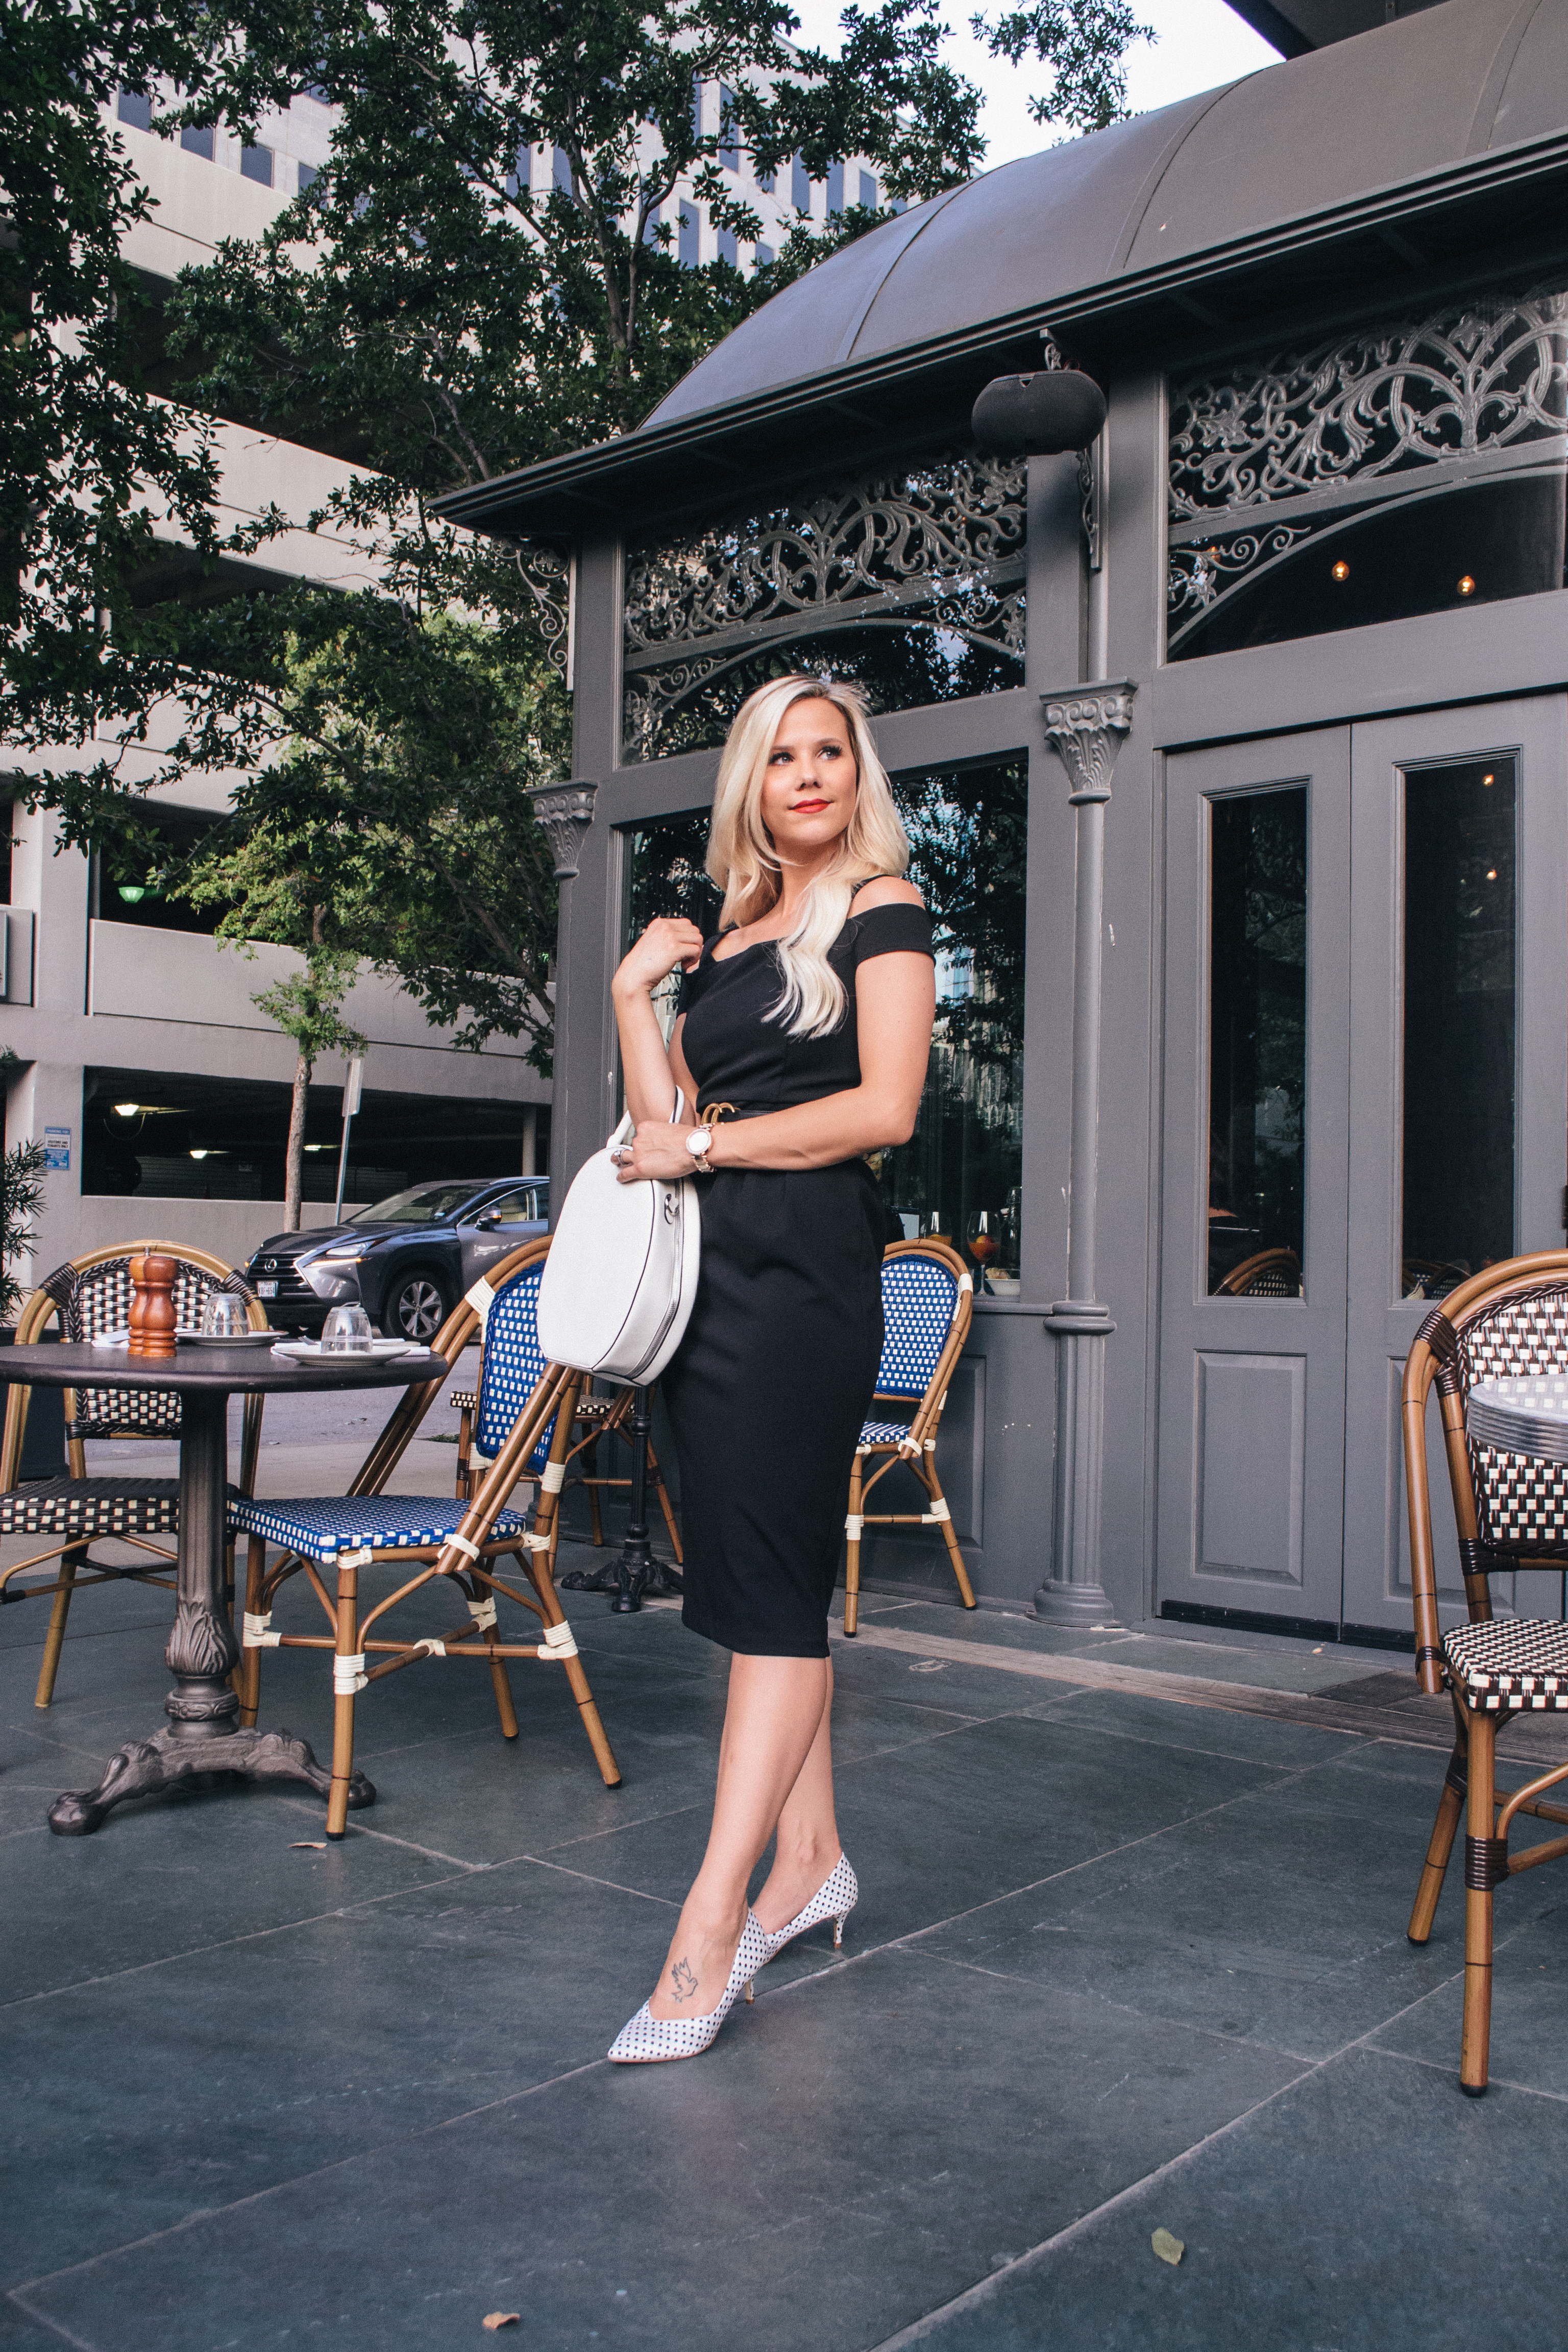 how to accessorize a LBD, how to style a little black dress, bringing back the little black dress, LBD, white round circle bag, blonde blogger, Dallas blonde, Dallas fashion blogger